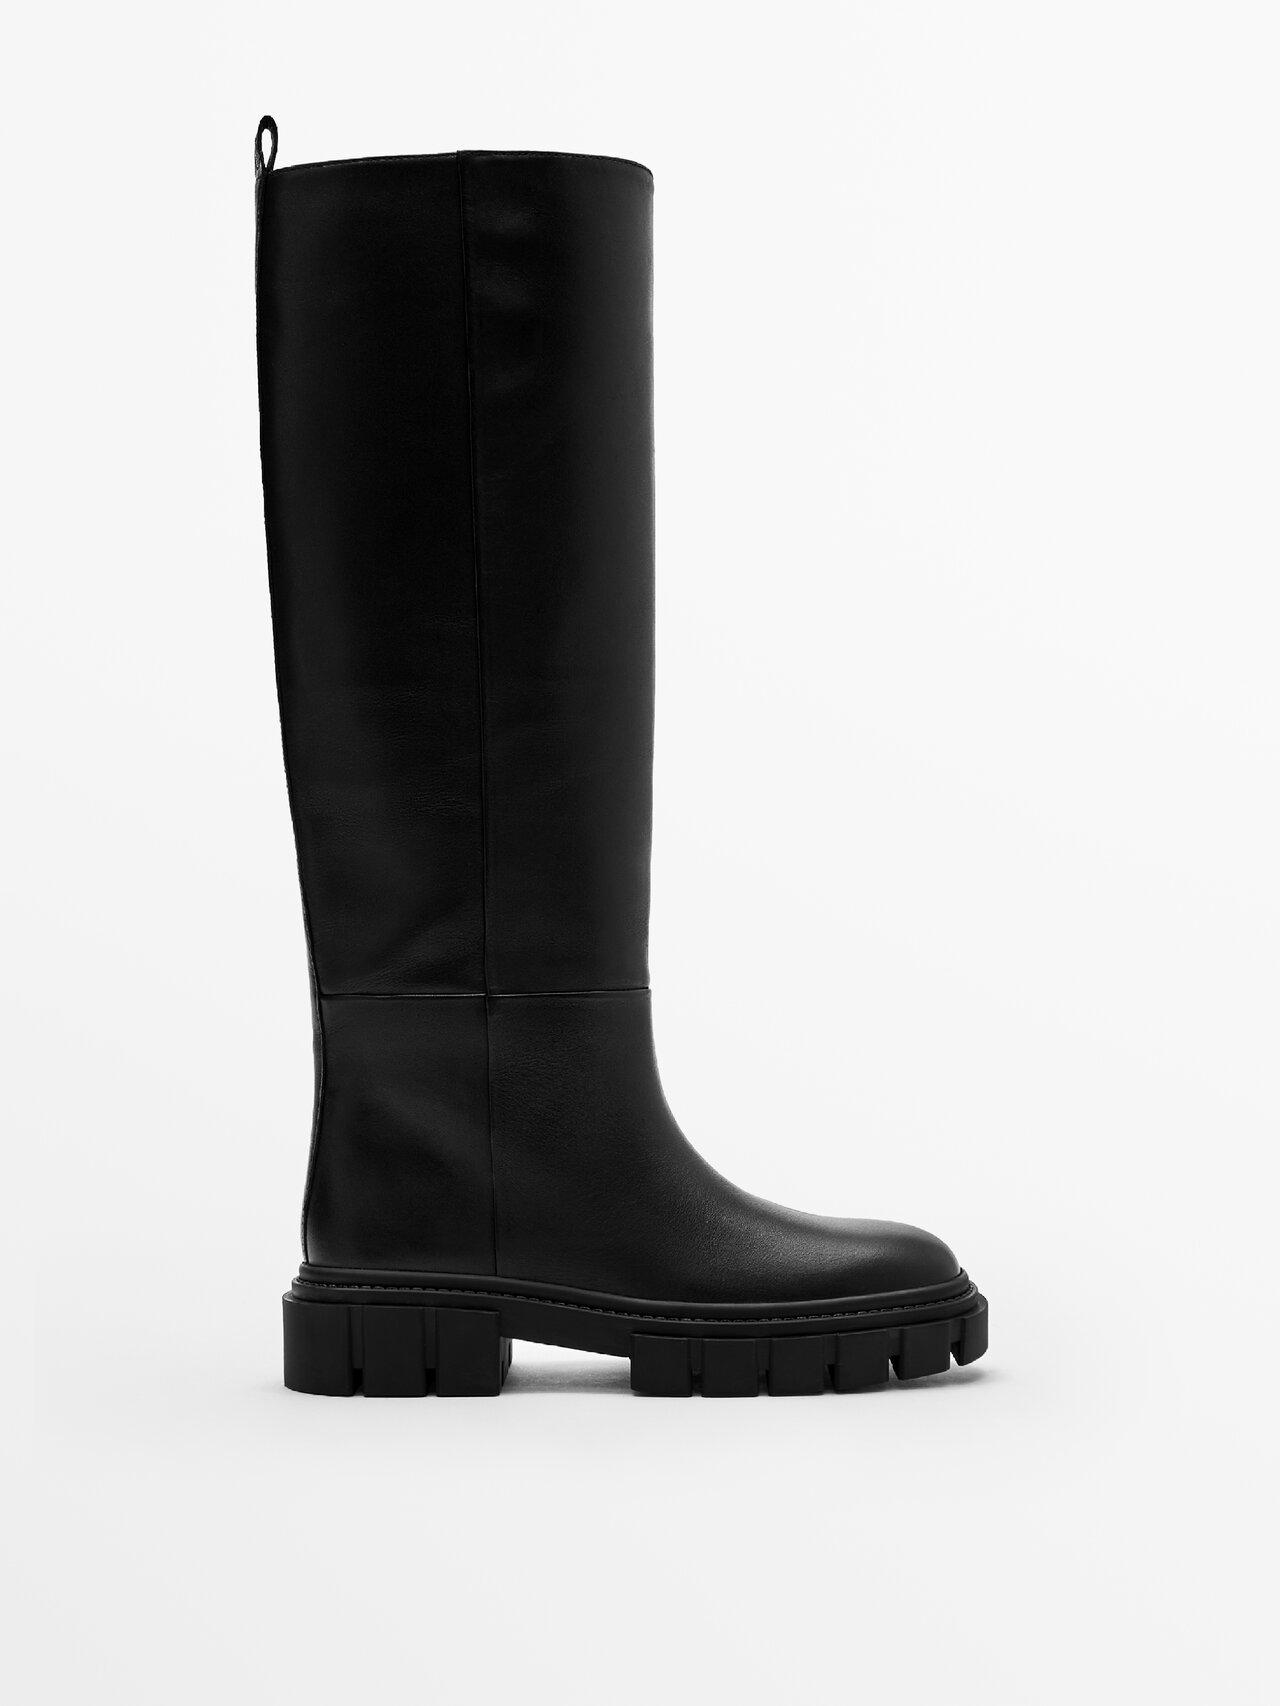 MASSIMO DUTTI Black Leather Boots With Super Track Sole | Lyst